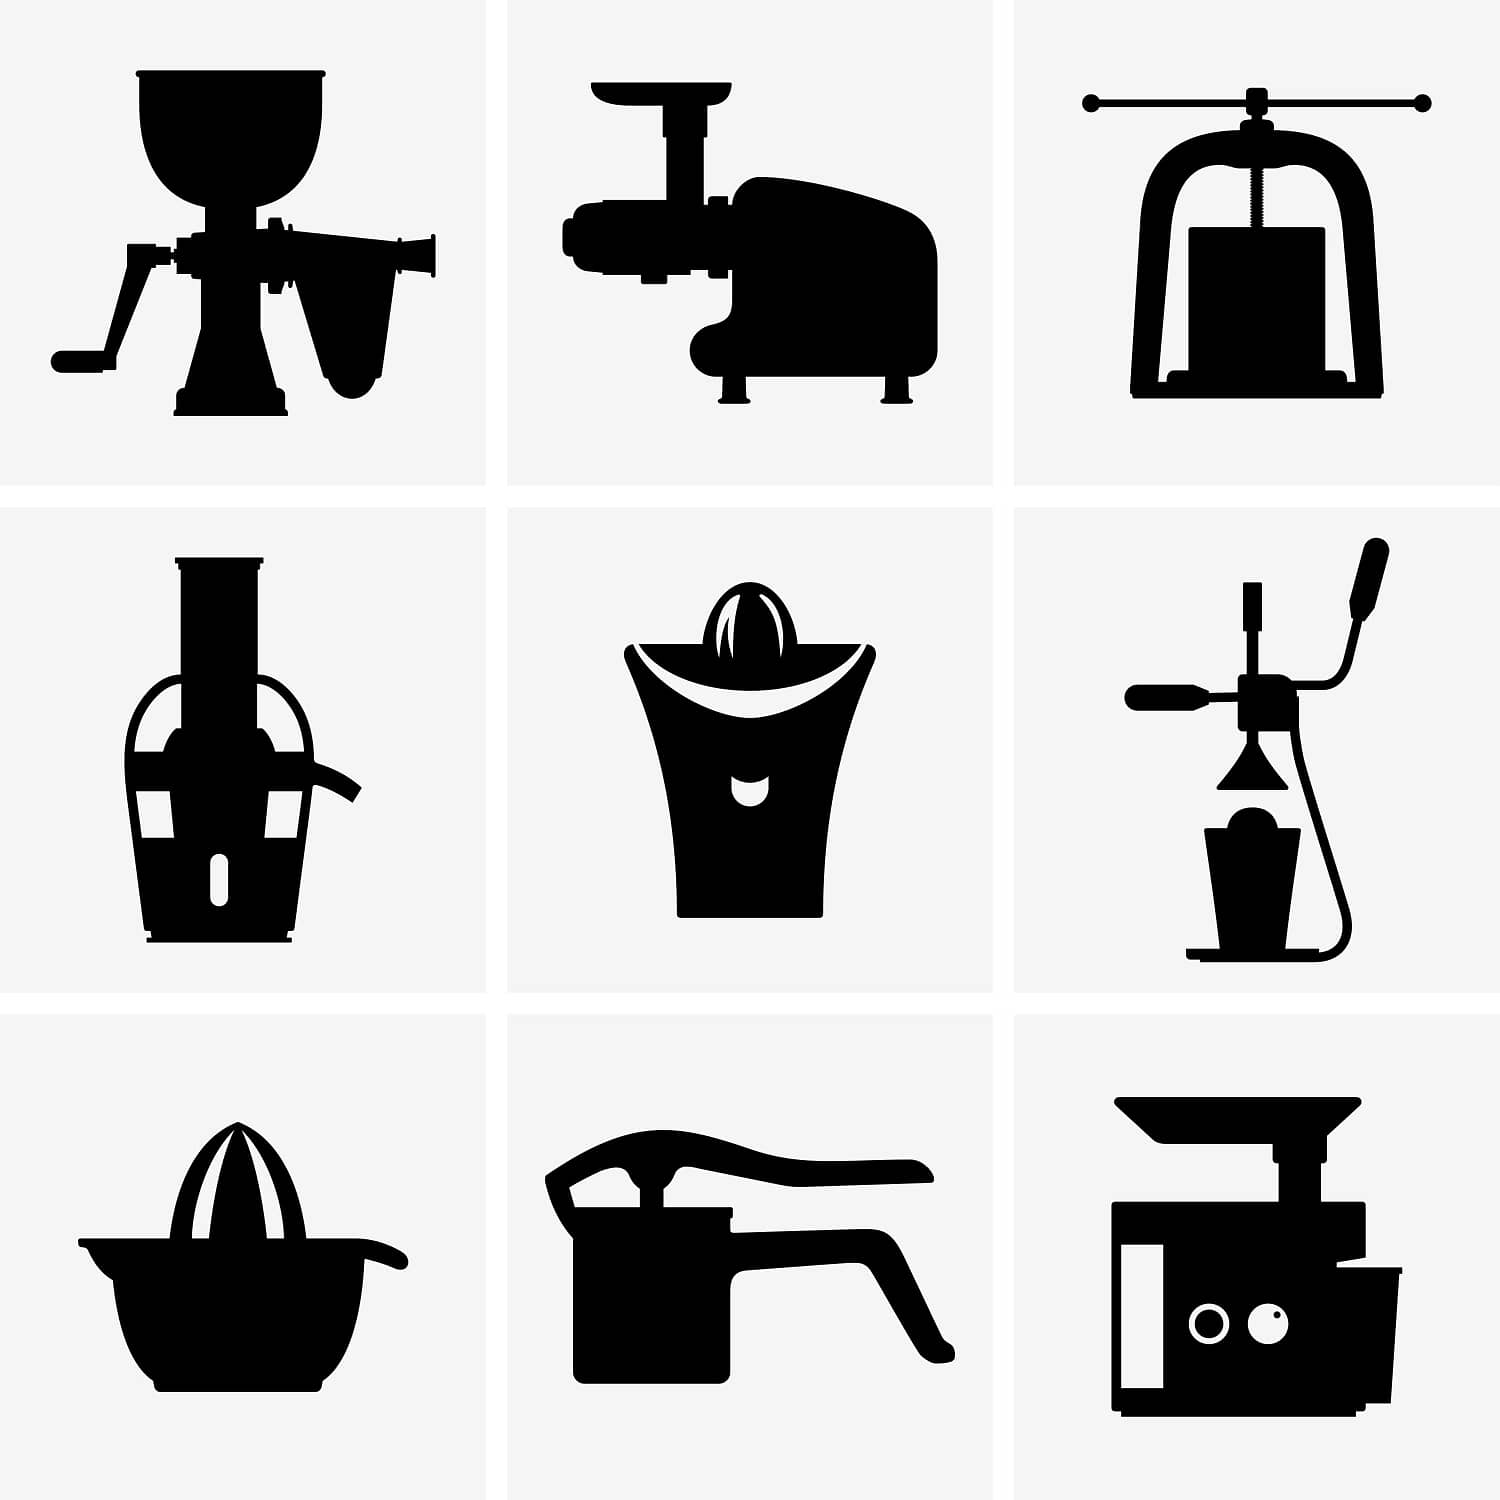 Black and white image of various juicers